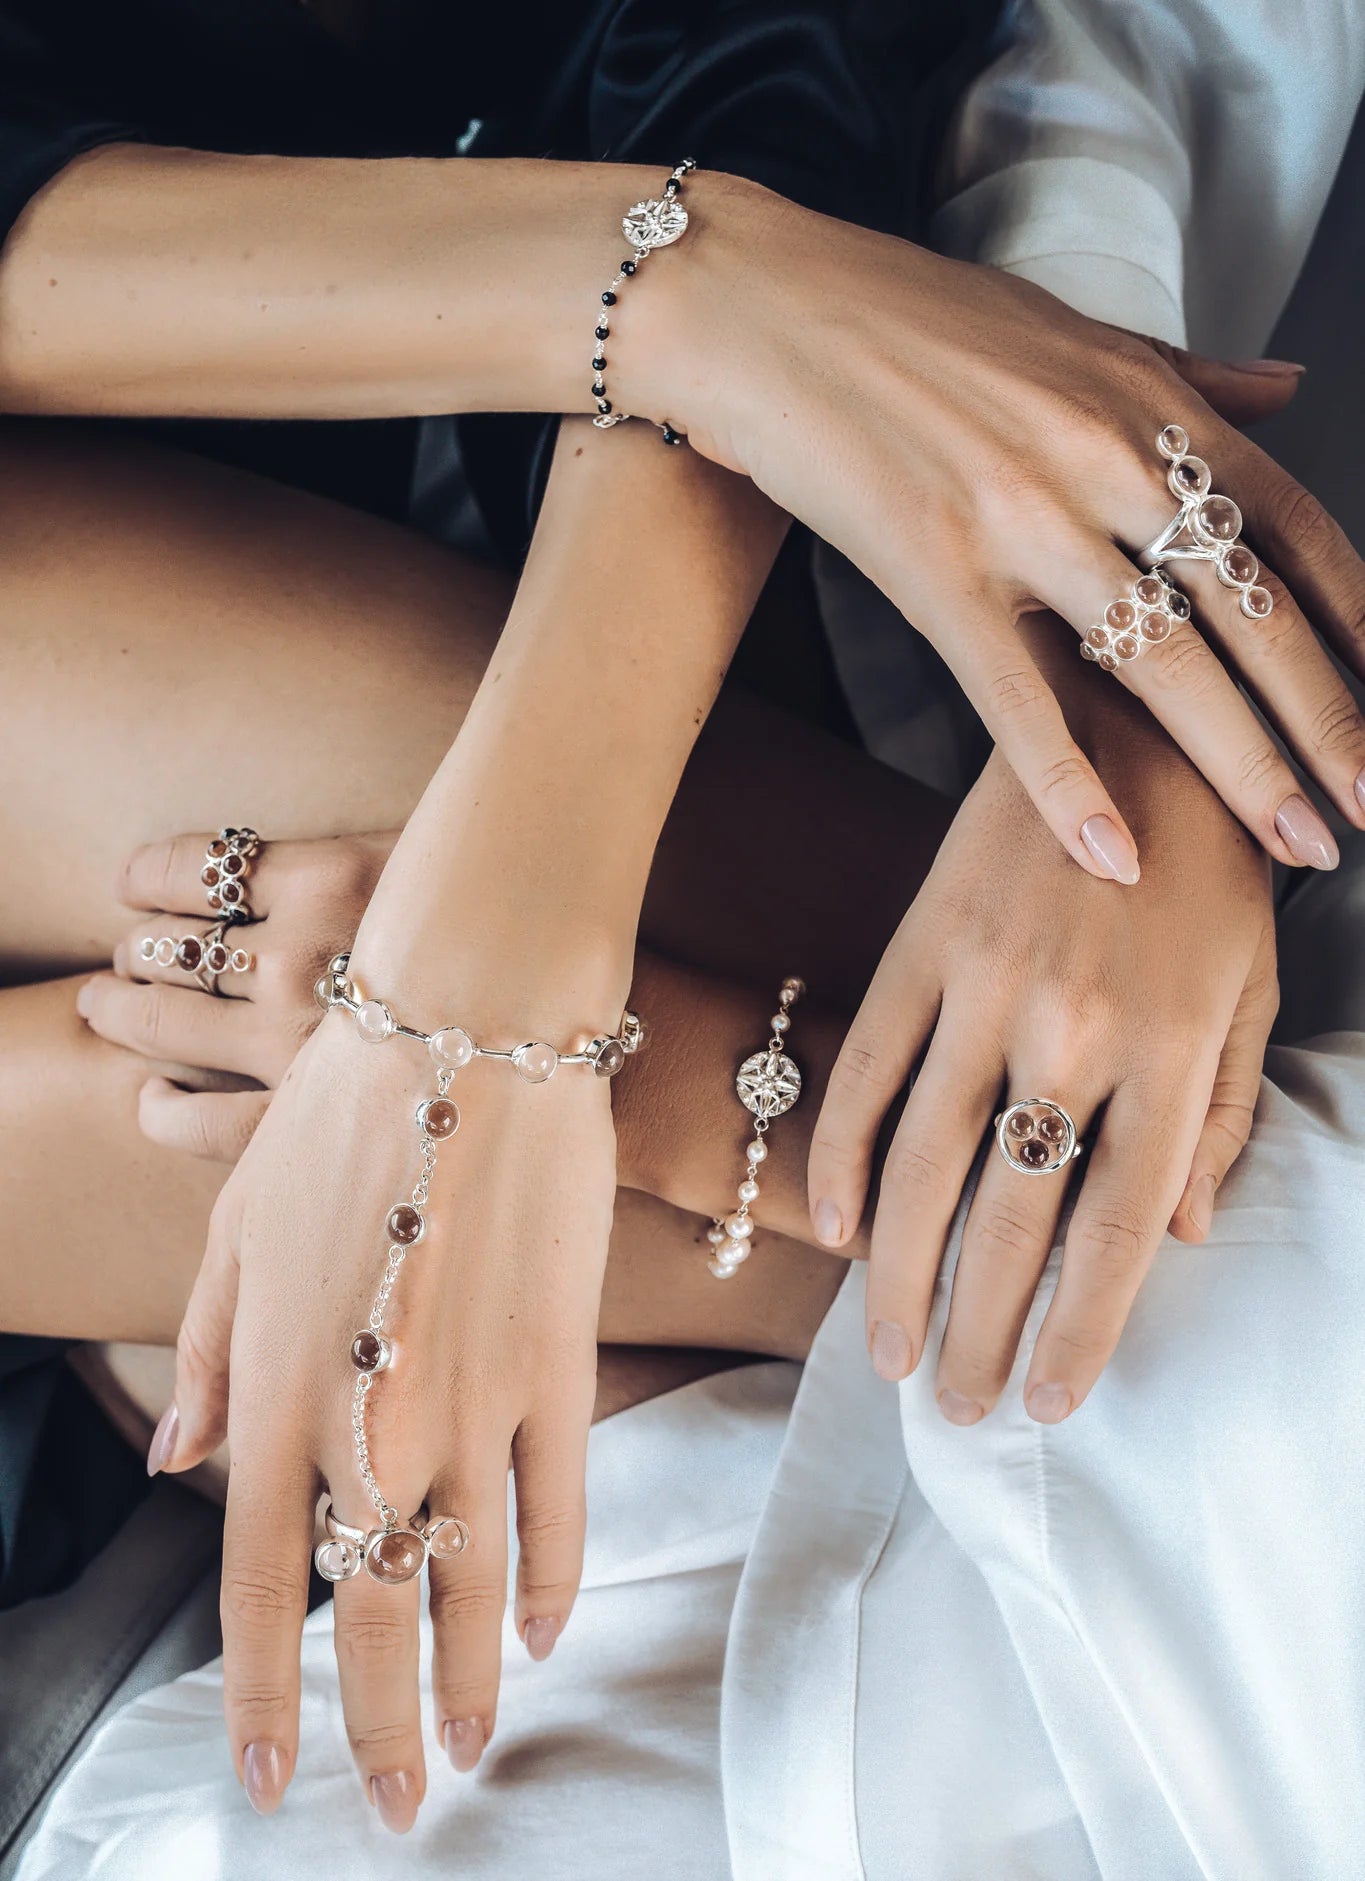 A delicate jewelry collection featuring rings, bracelets and hand-chains